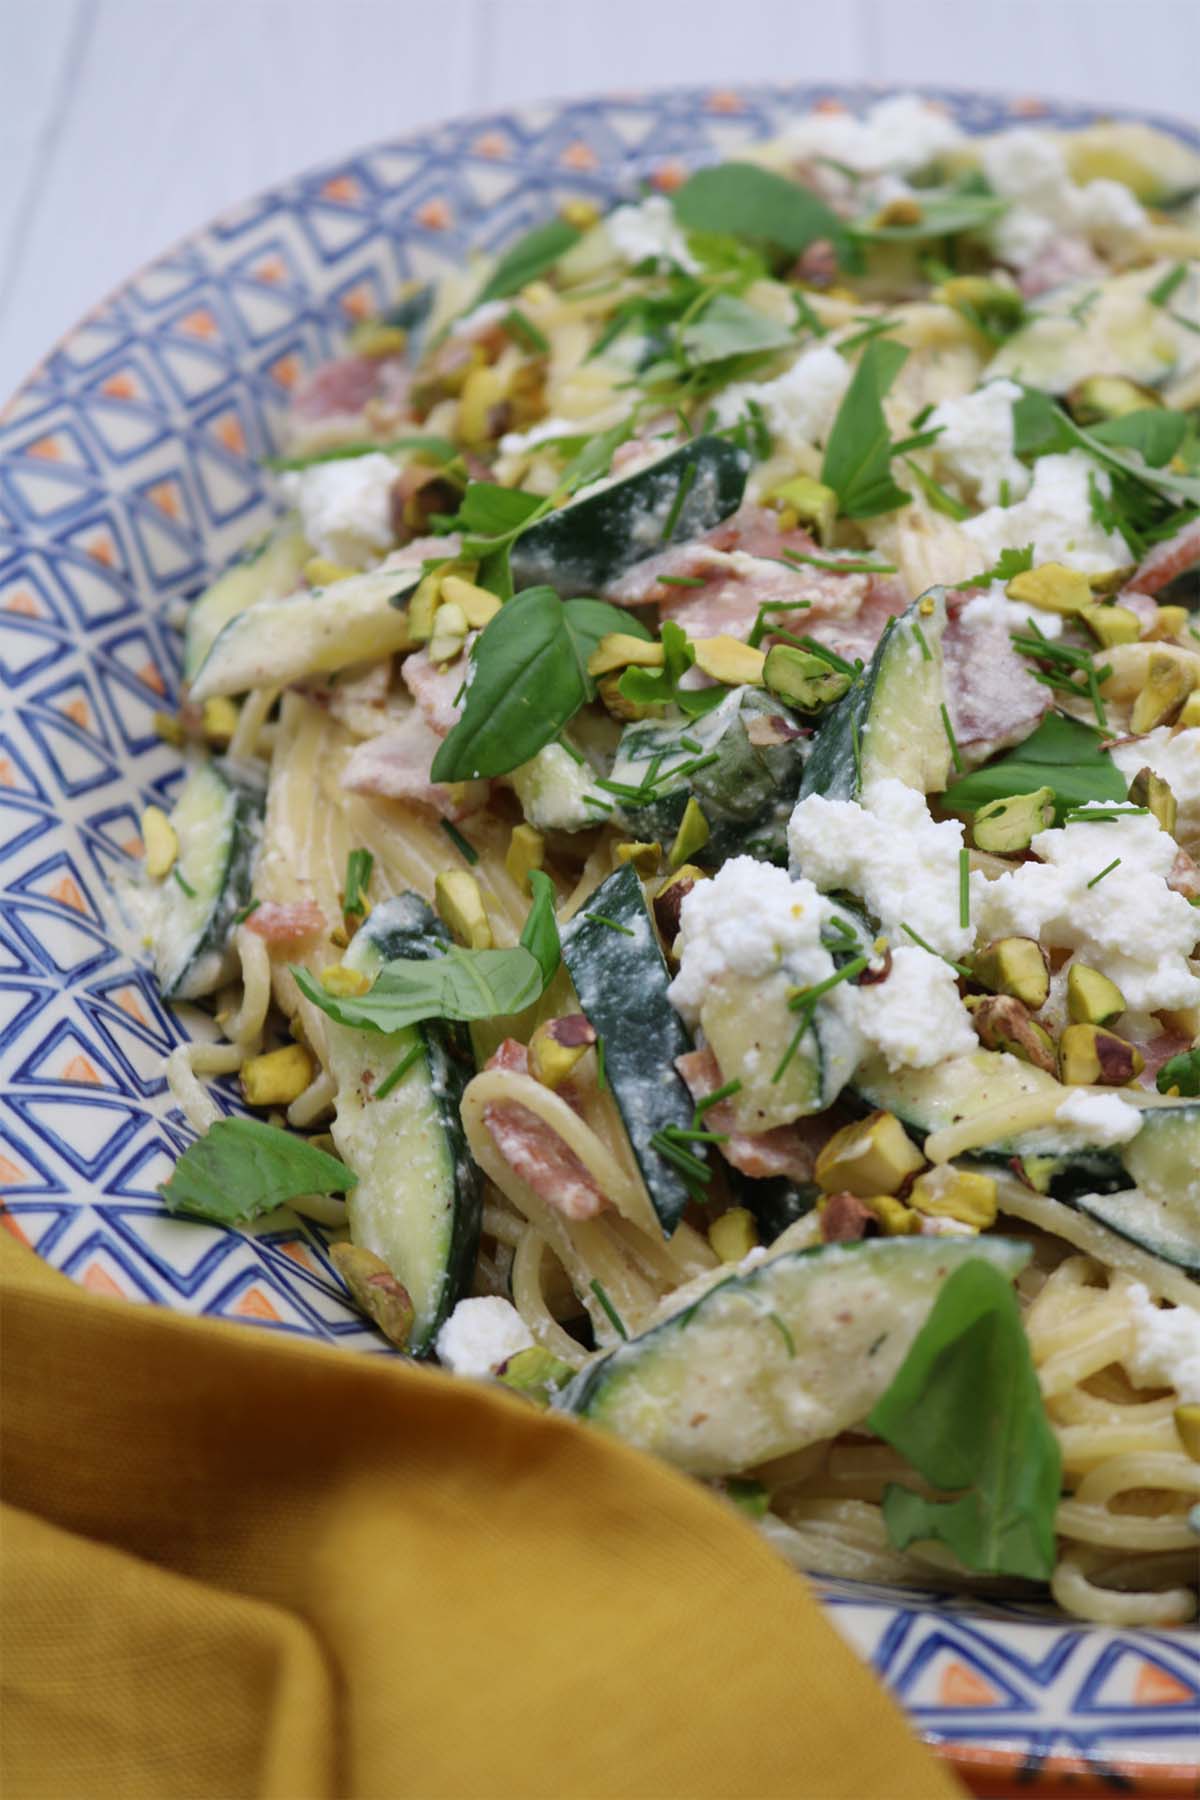 Pasta with Crispy Bacon, Courgette and Herbs, Pasta with Crispy Bacon, Courgette and Herbs